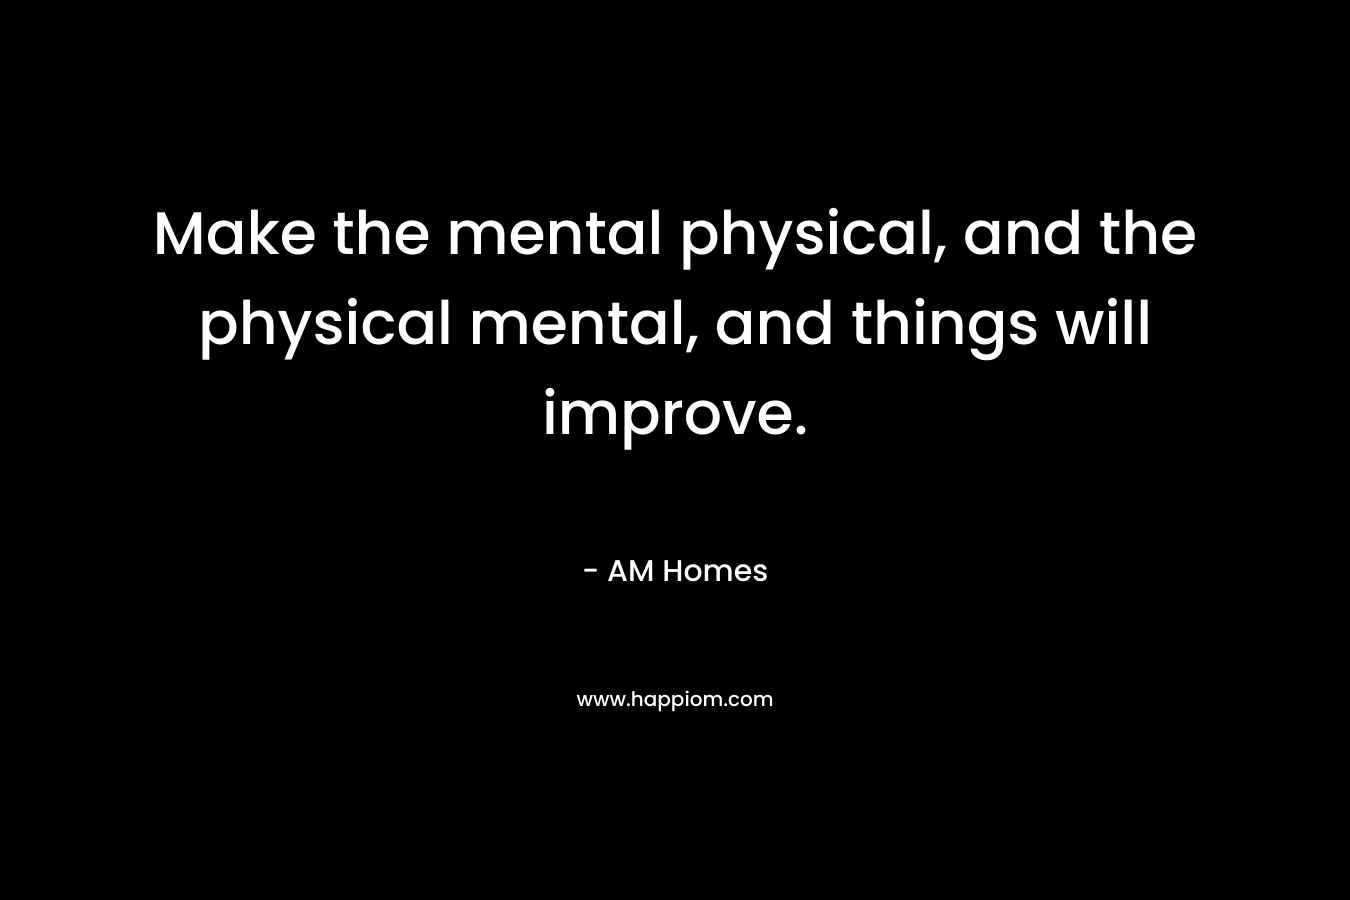 Make the mental physical, and the physical mental, and things will improve.